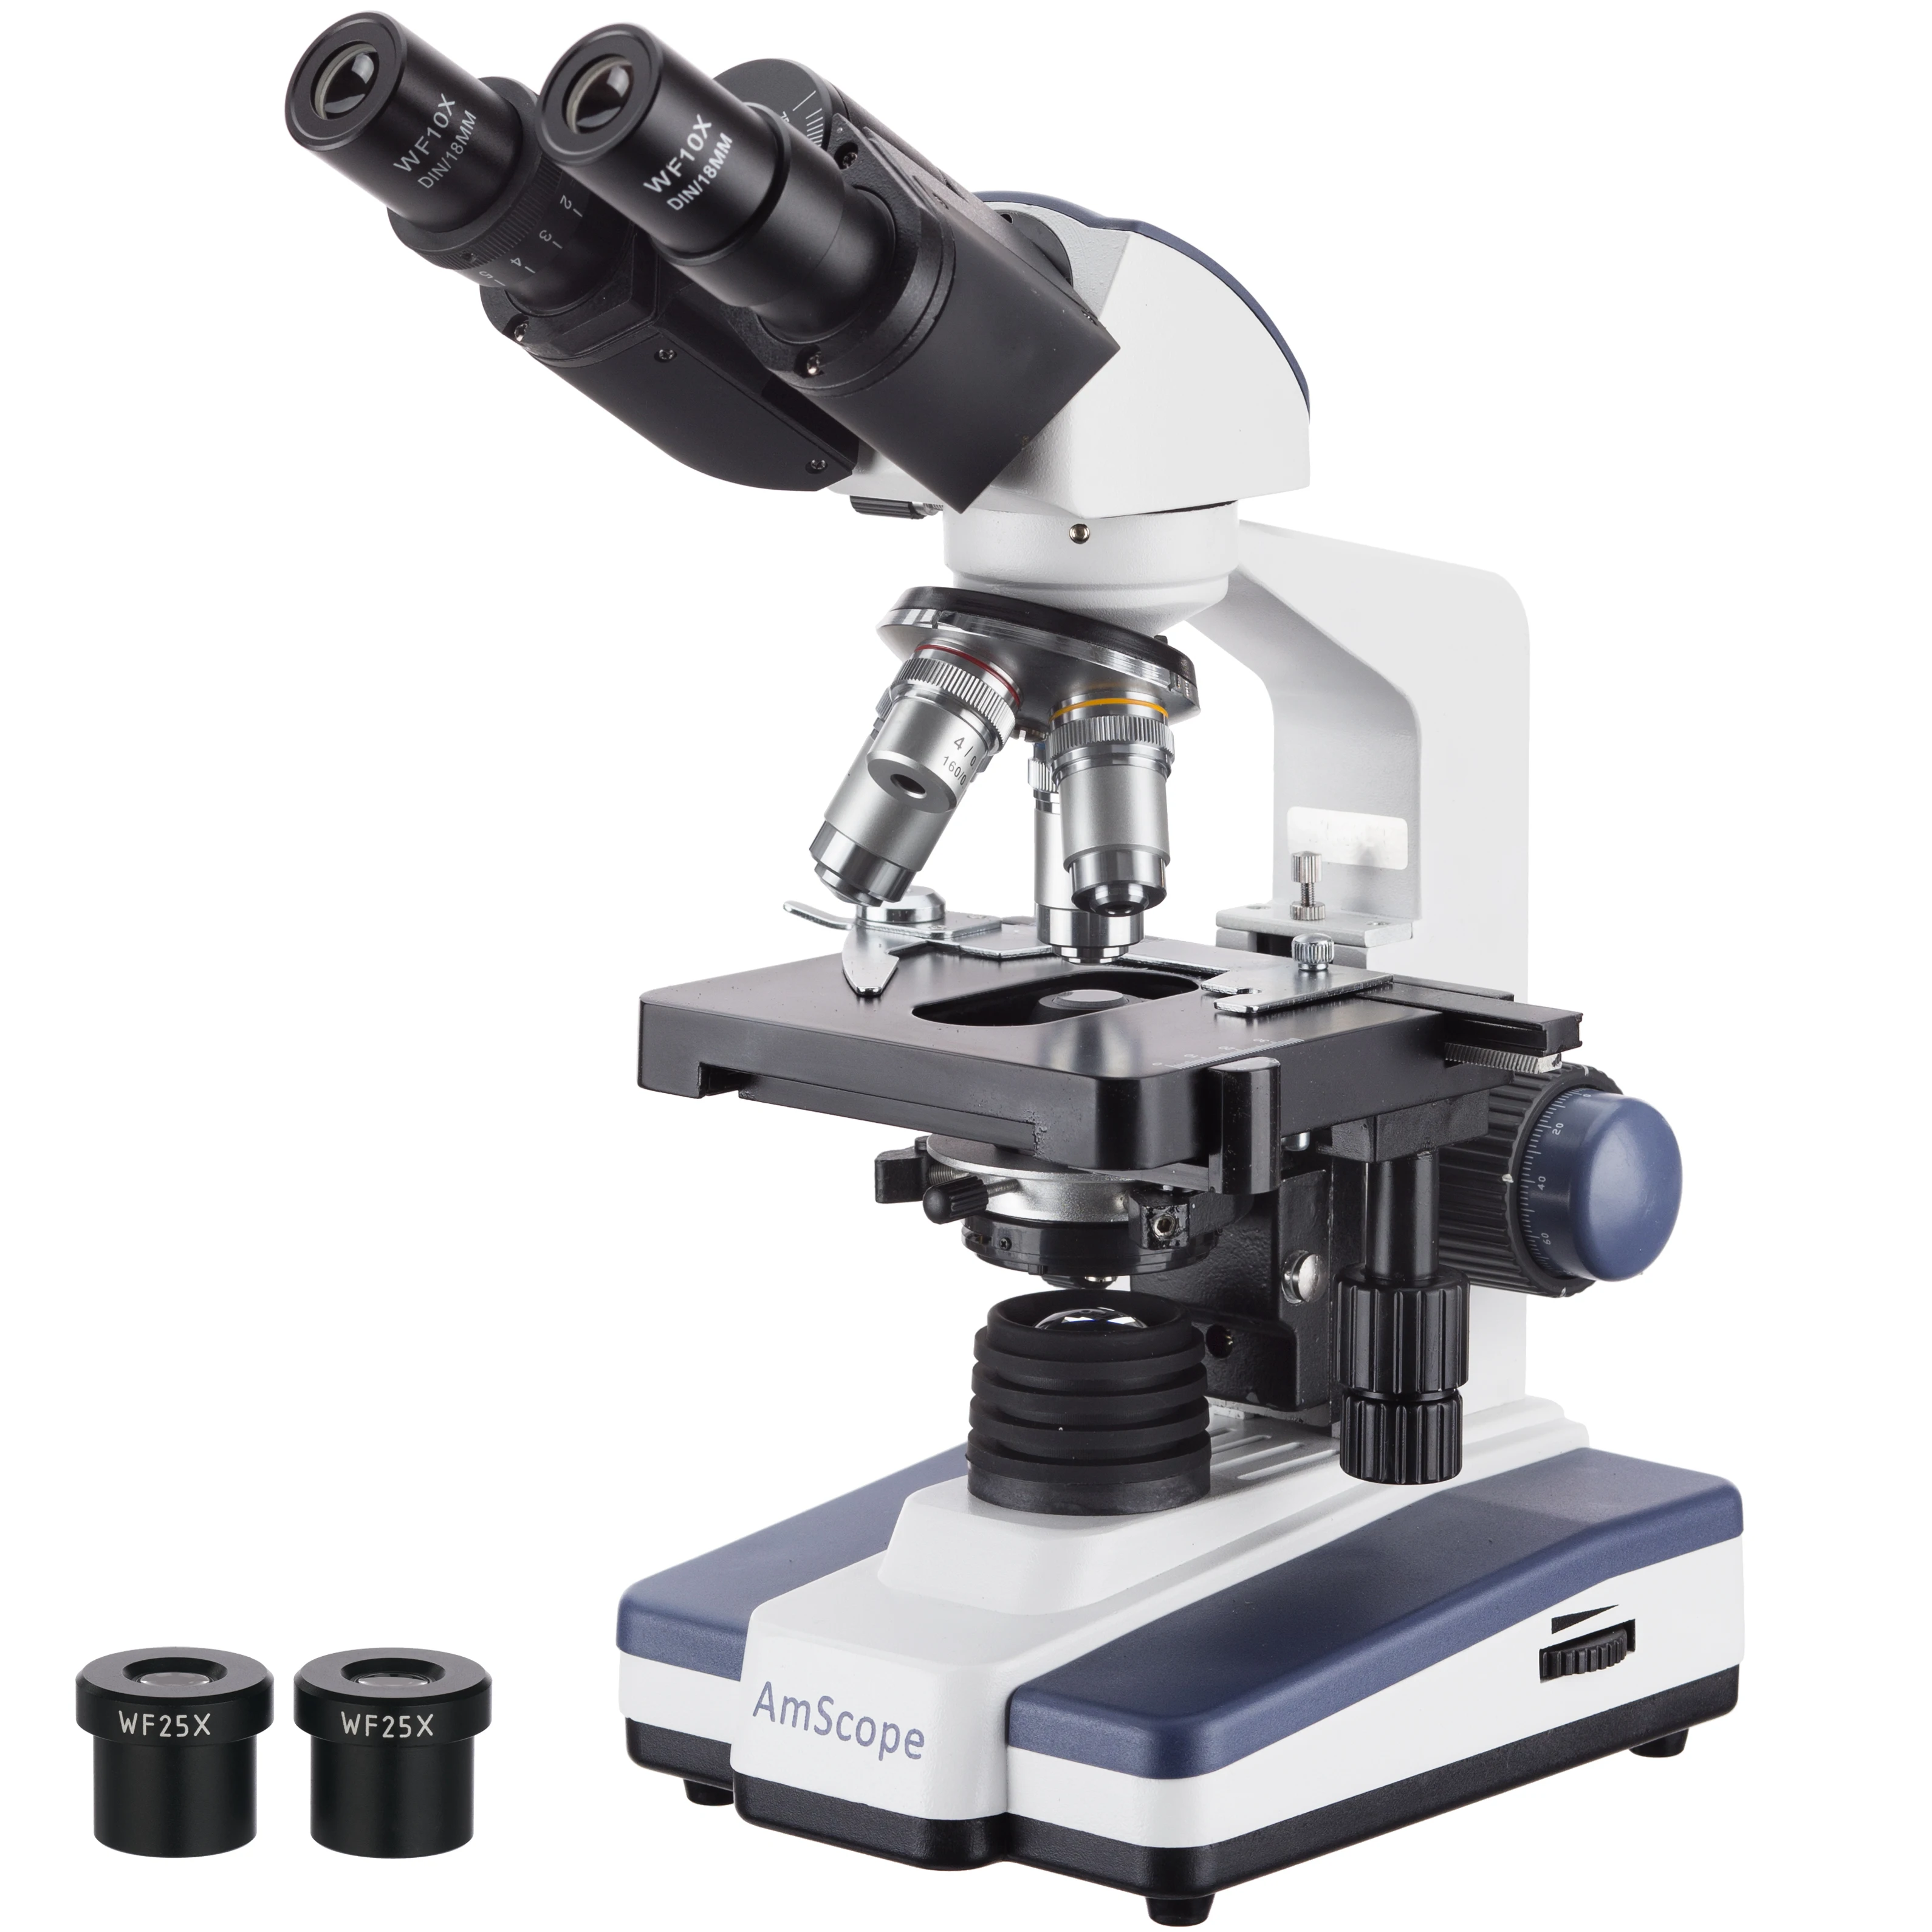 

AmScope 40X-2500X LED Lab Binocular Compound Microscope with 3D-Stage